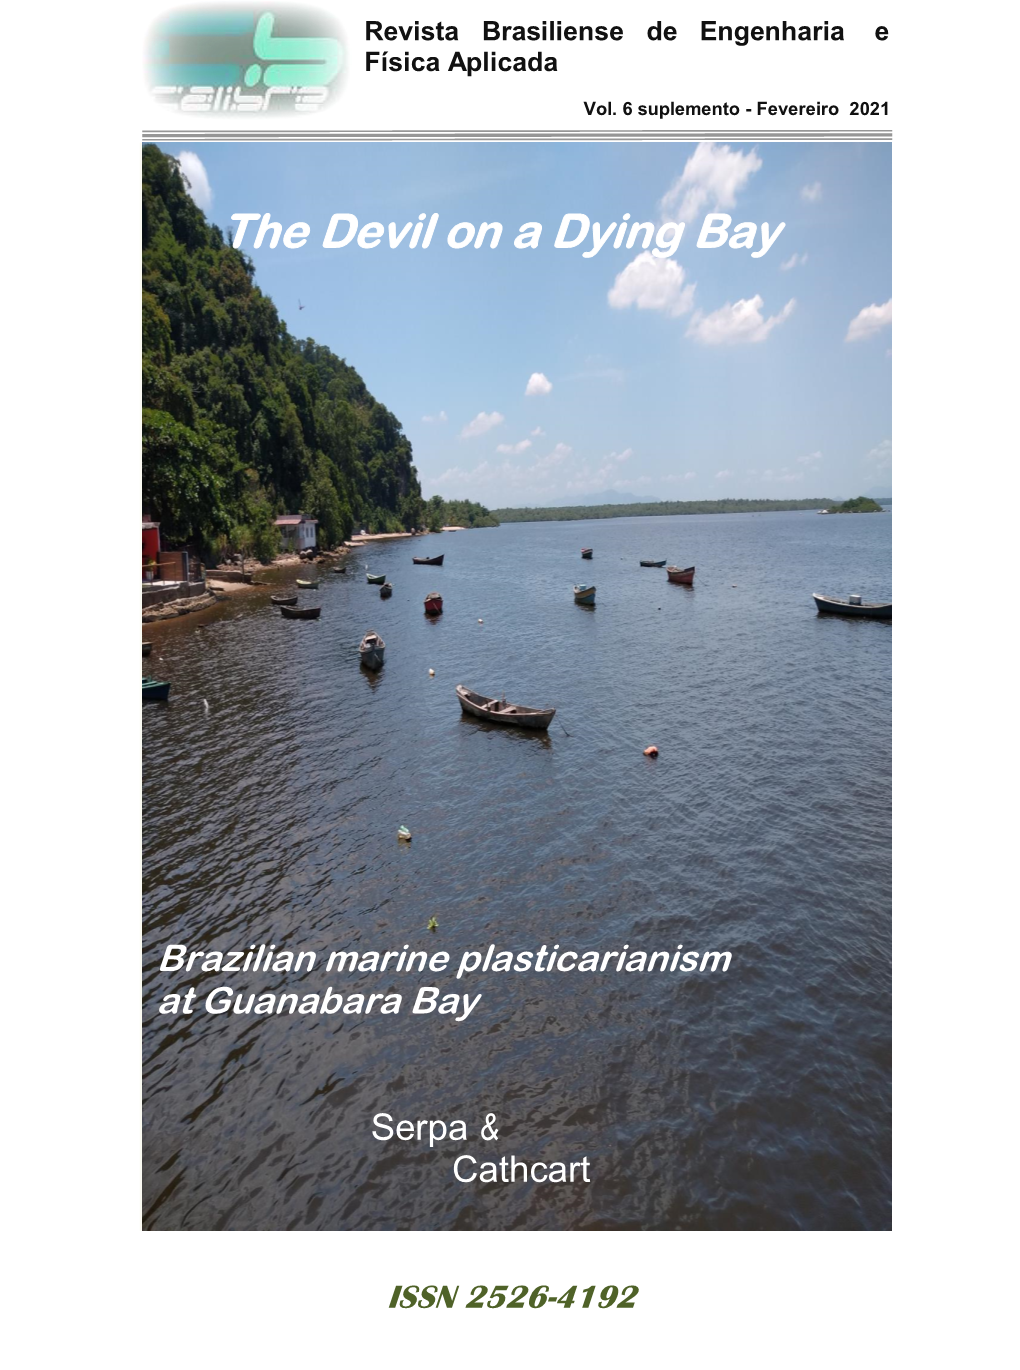 The Devil on a Dying Bay